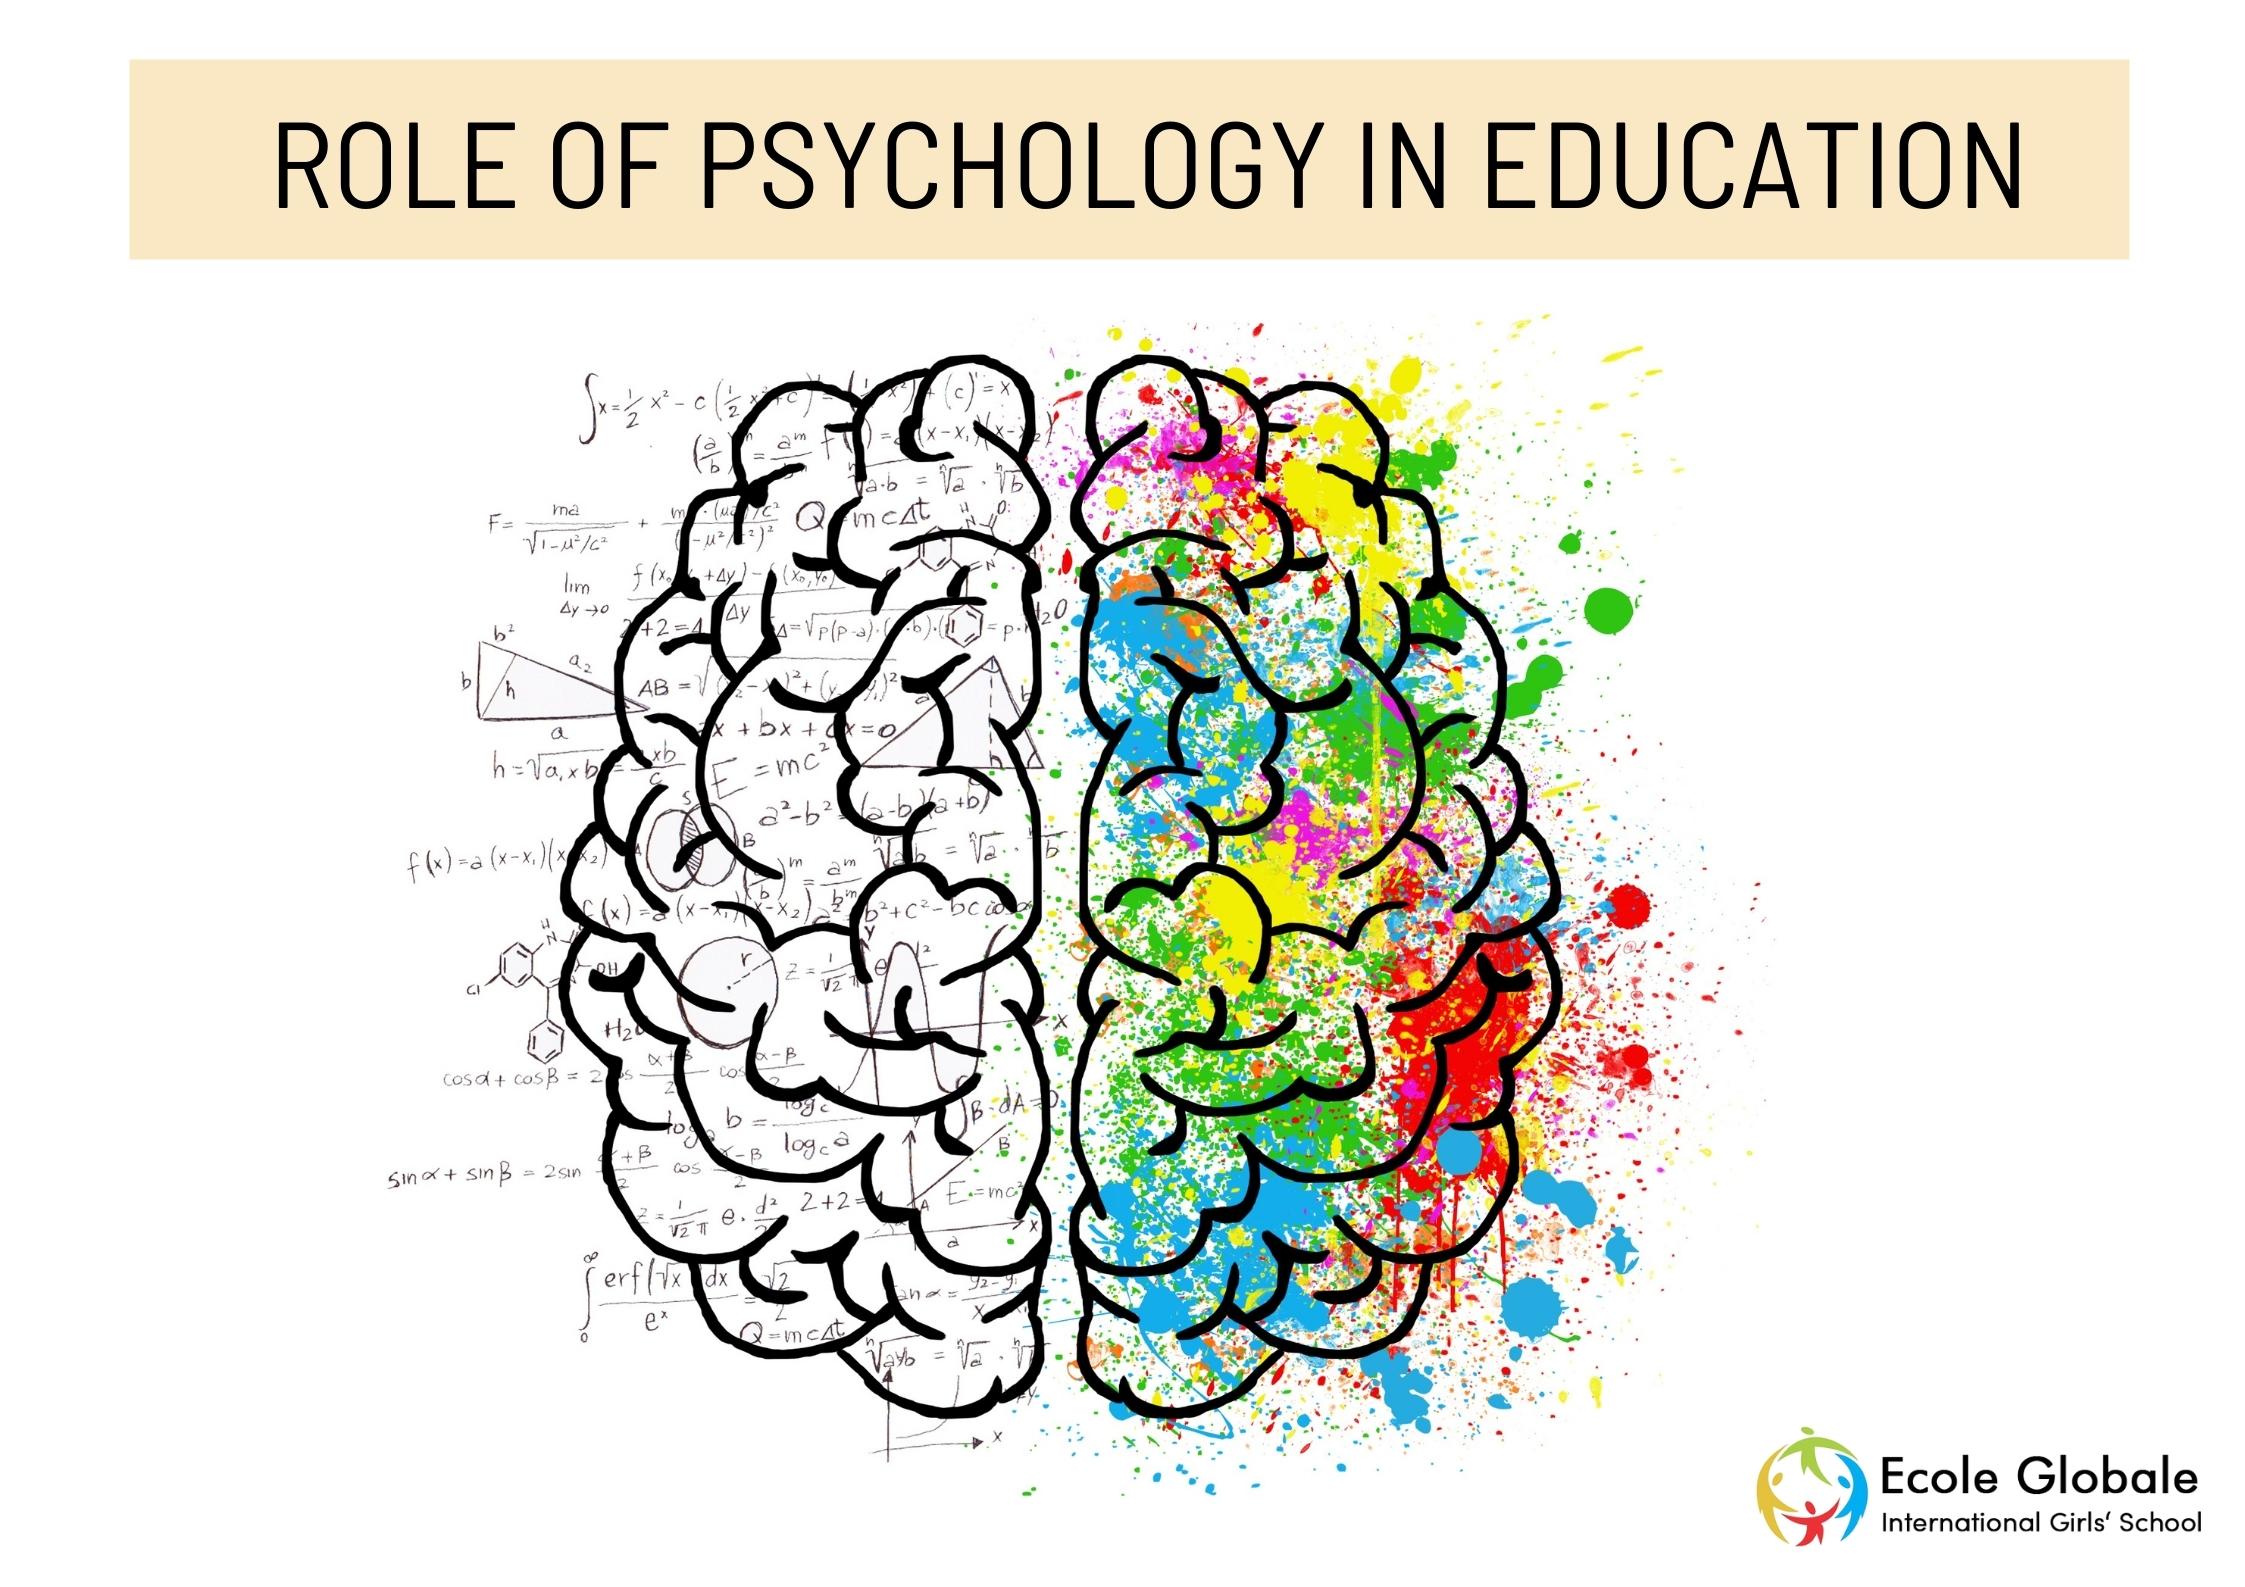 What is the role of psychology in education?